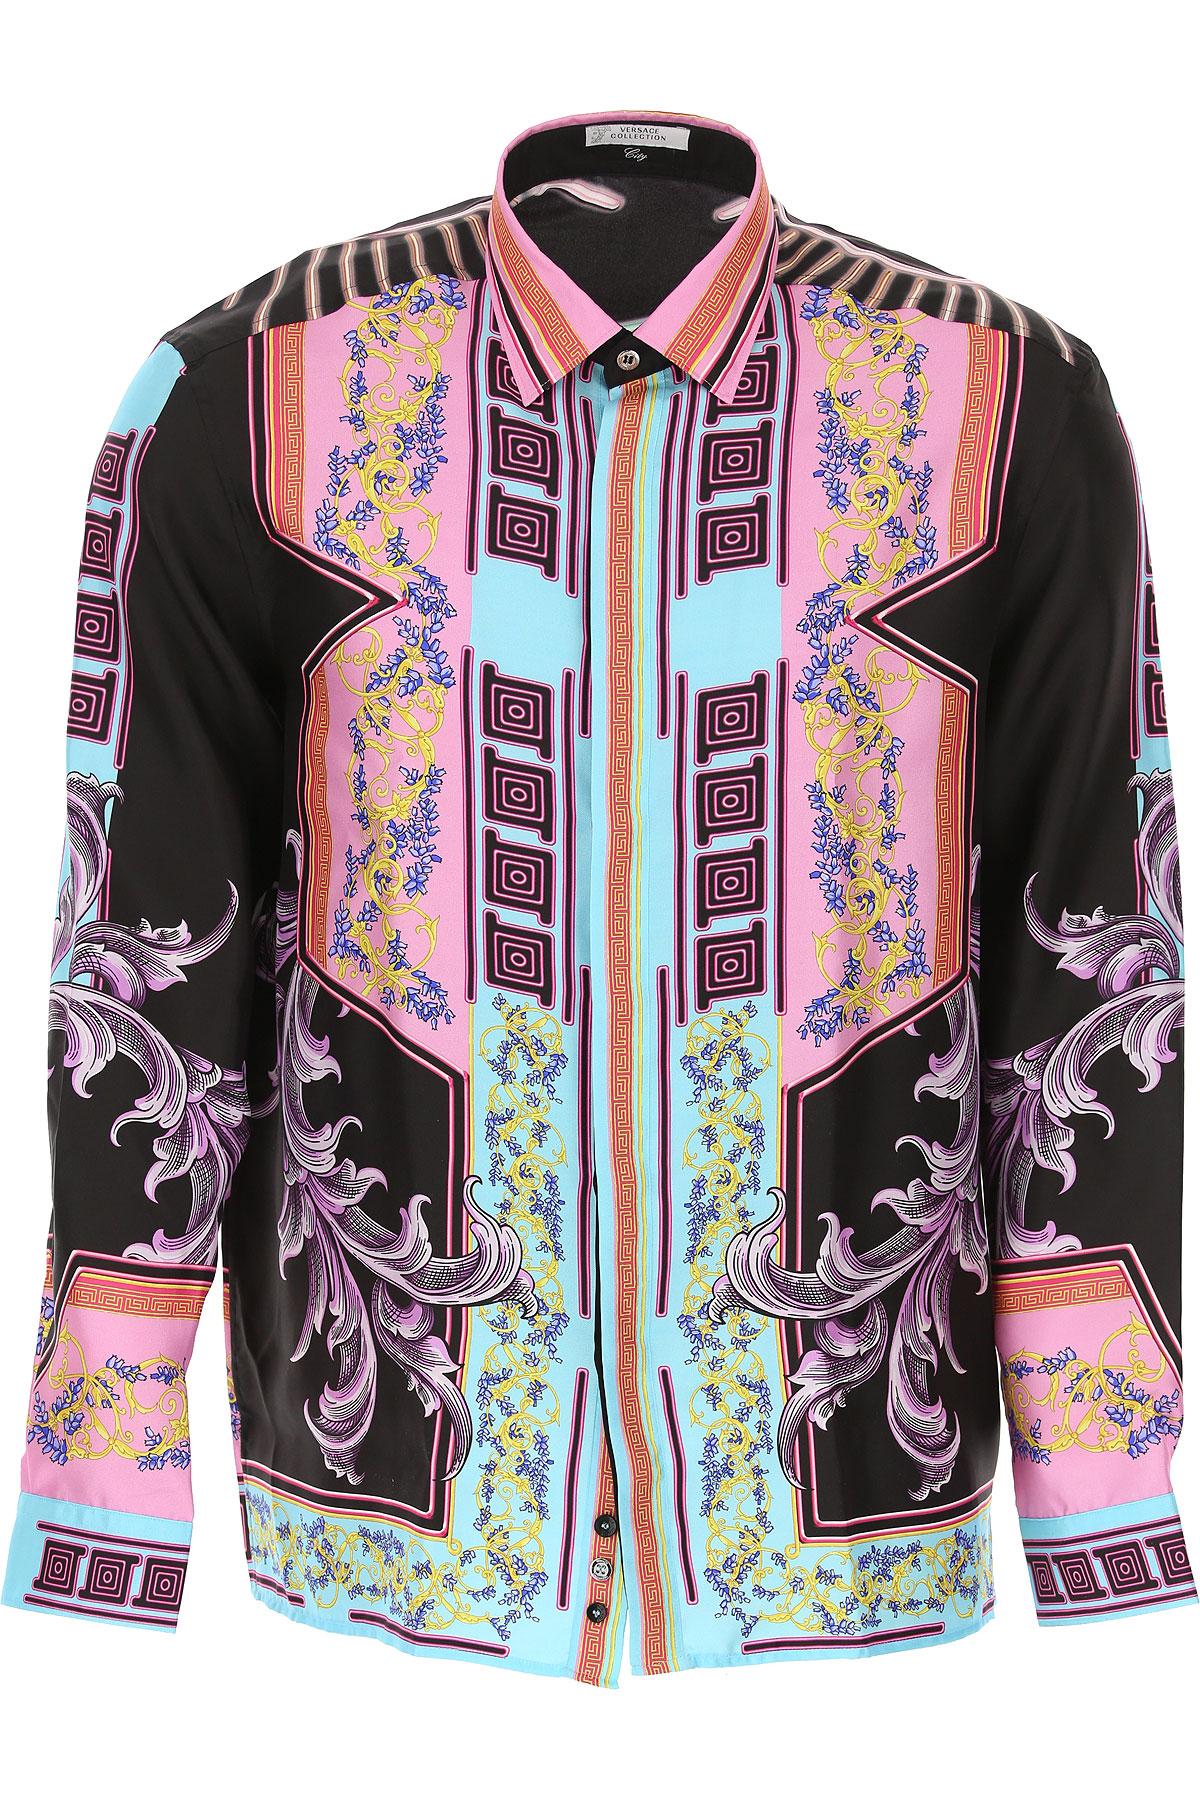 Versace Shirt For Men On Sale in Pink for Men - Lyst